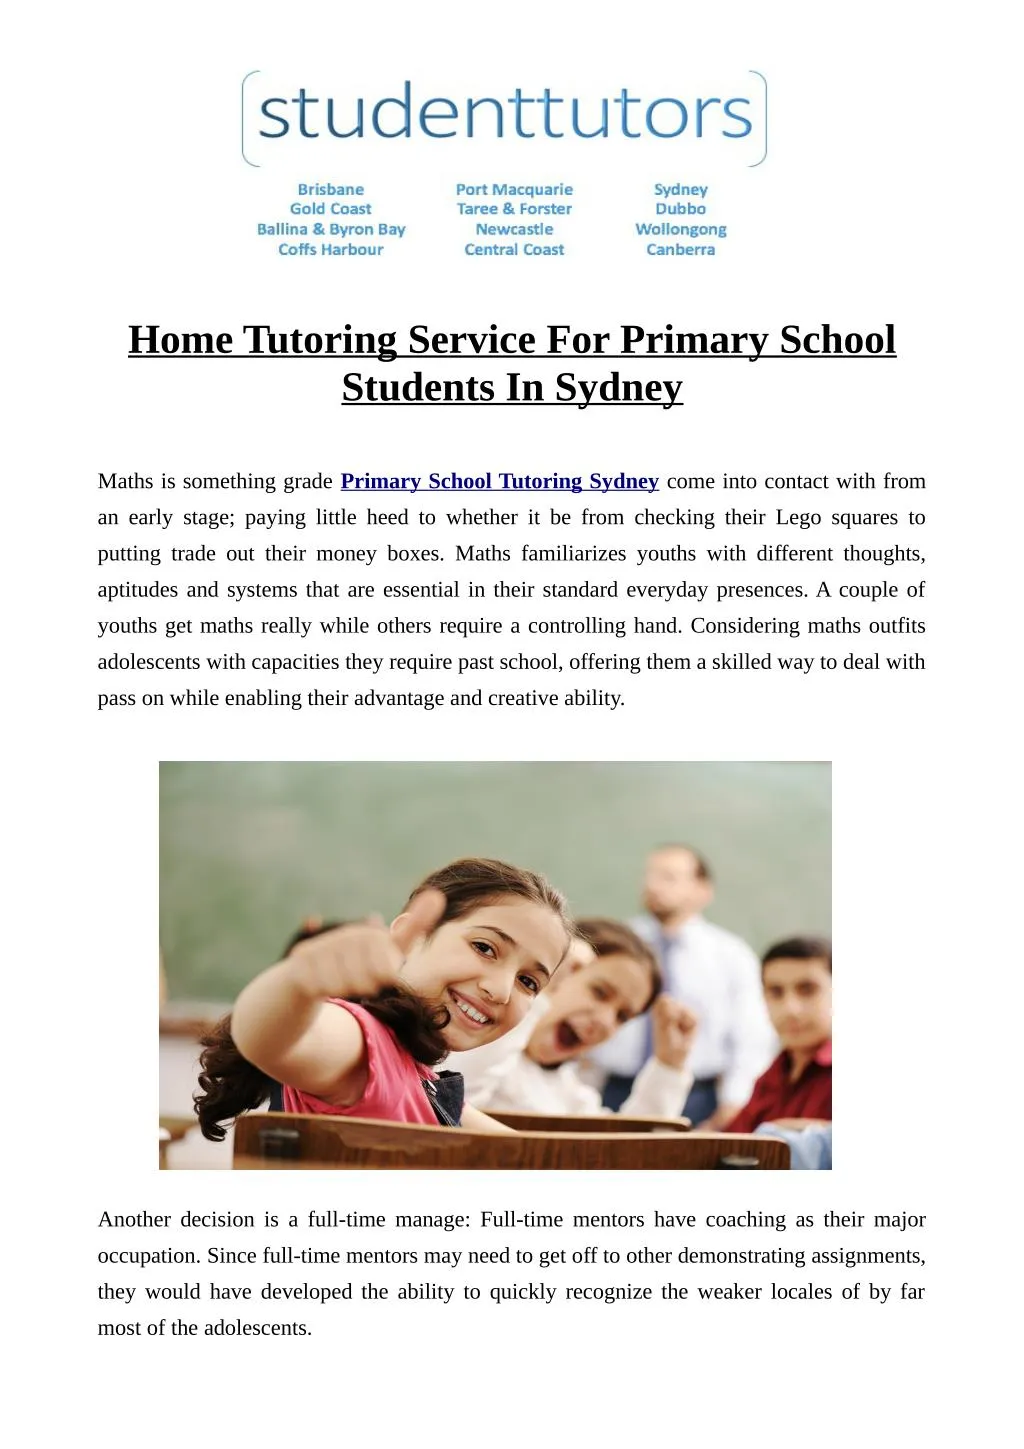 home tutoring service for primary school students